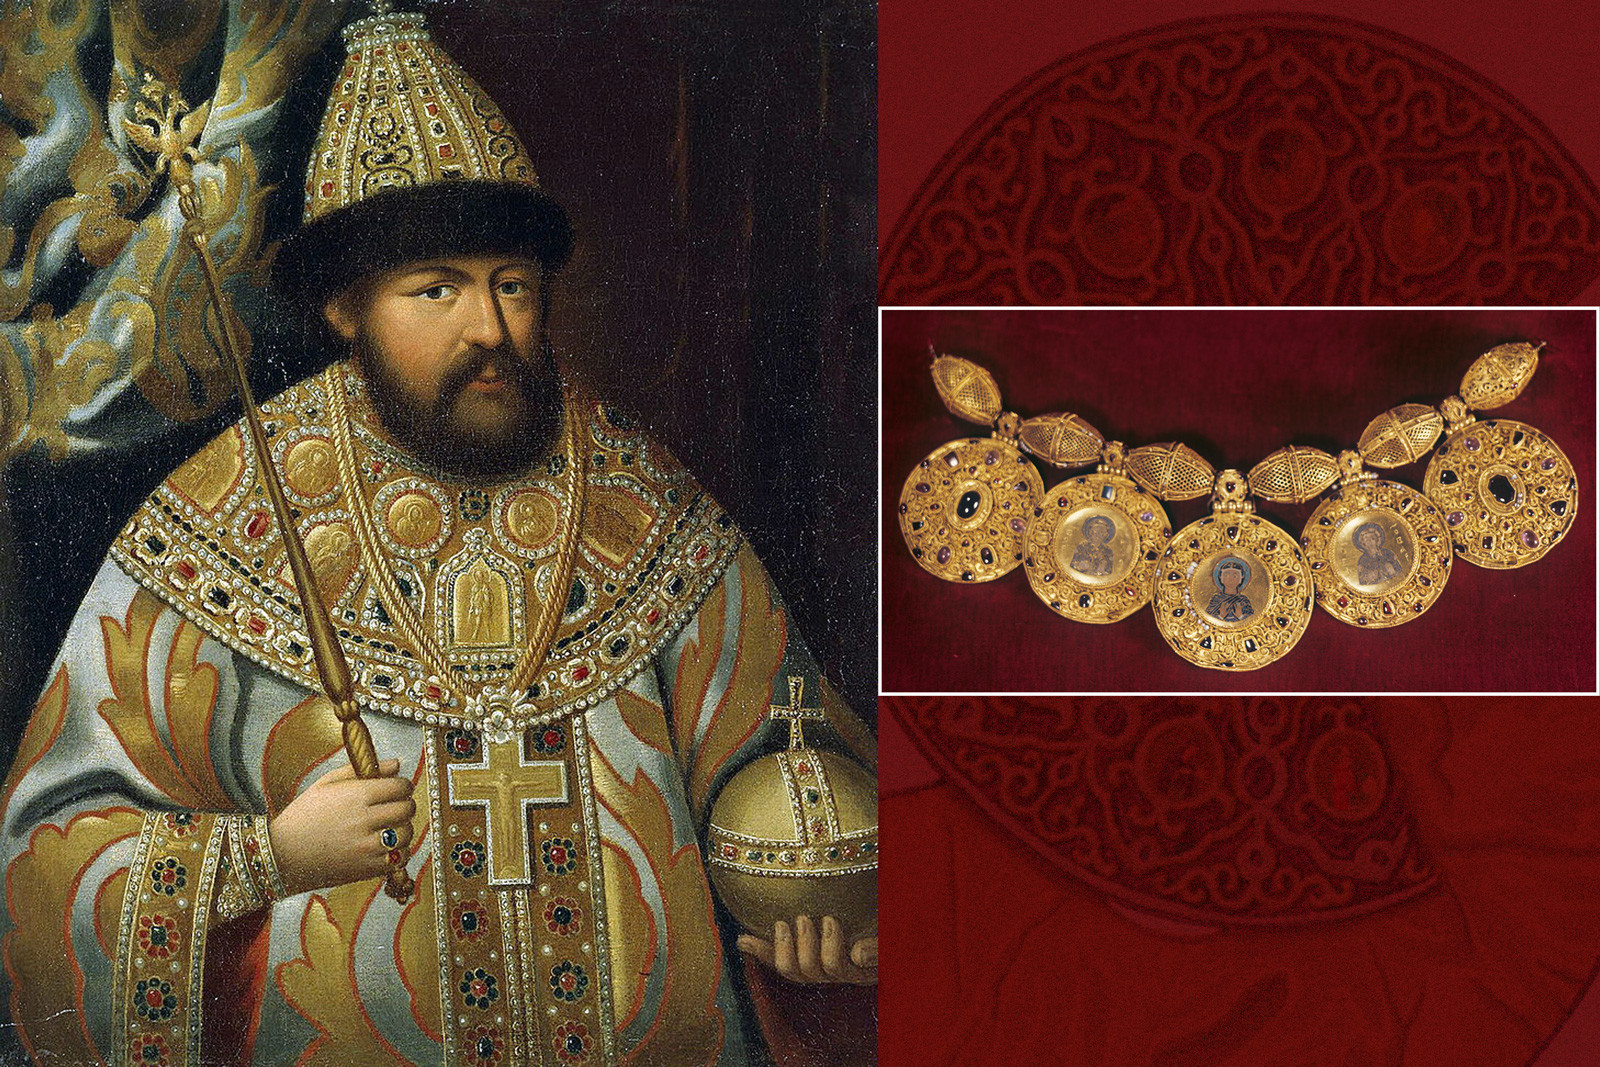 Tsar Alexis of Russia in the 'Great Outfit' (L) and a barma (R)